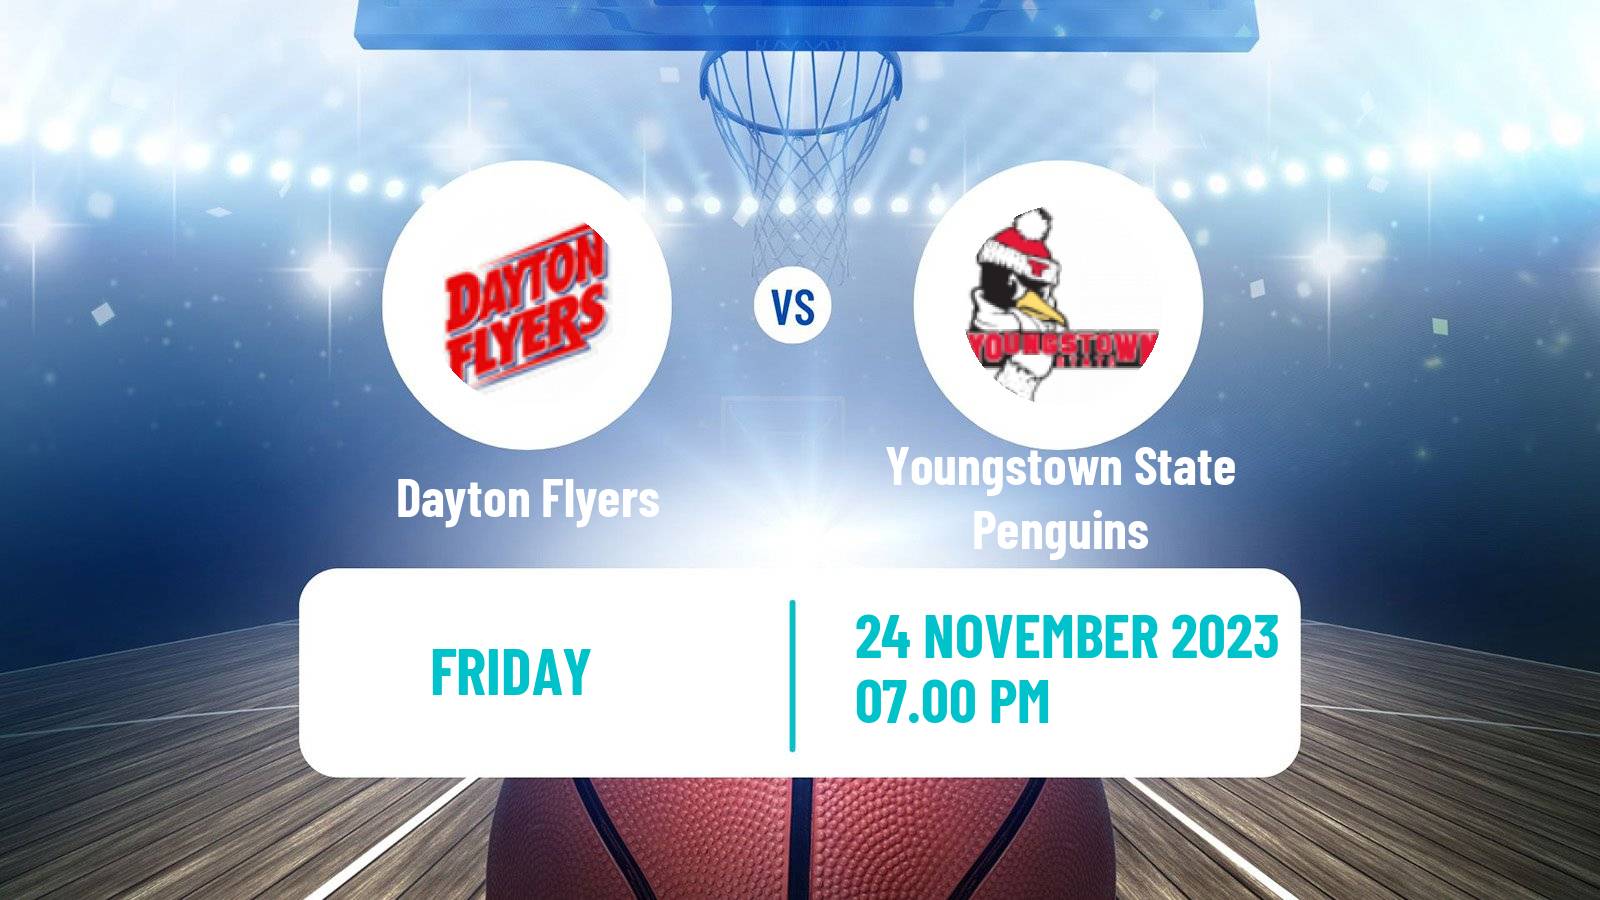 Basketball NCAA College Basketball Dayton Flyers - Youngstown State Penguins